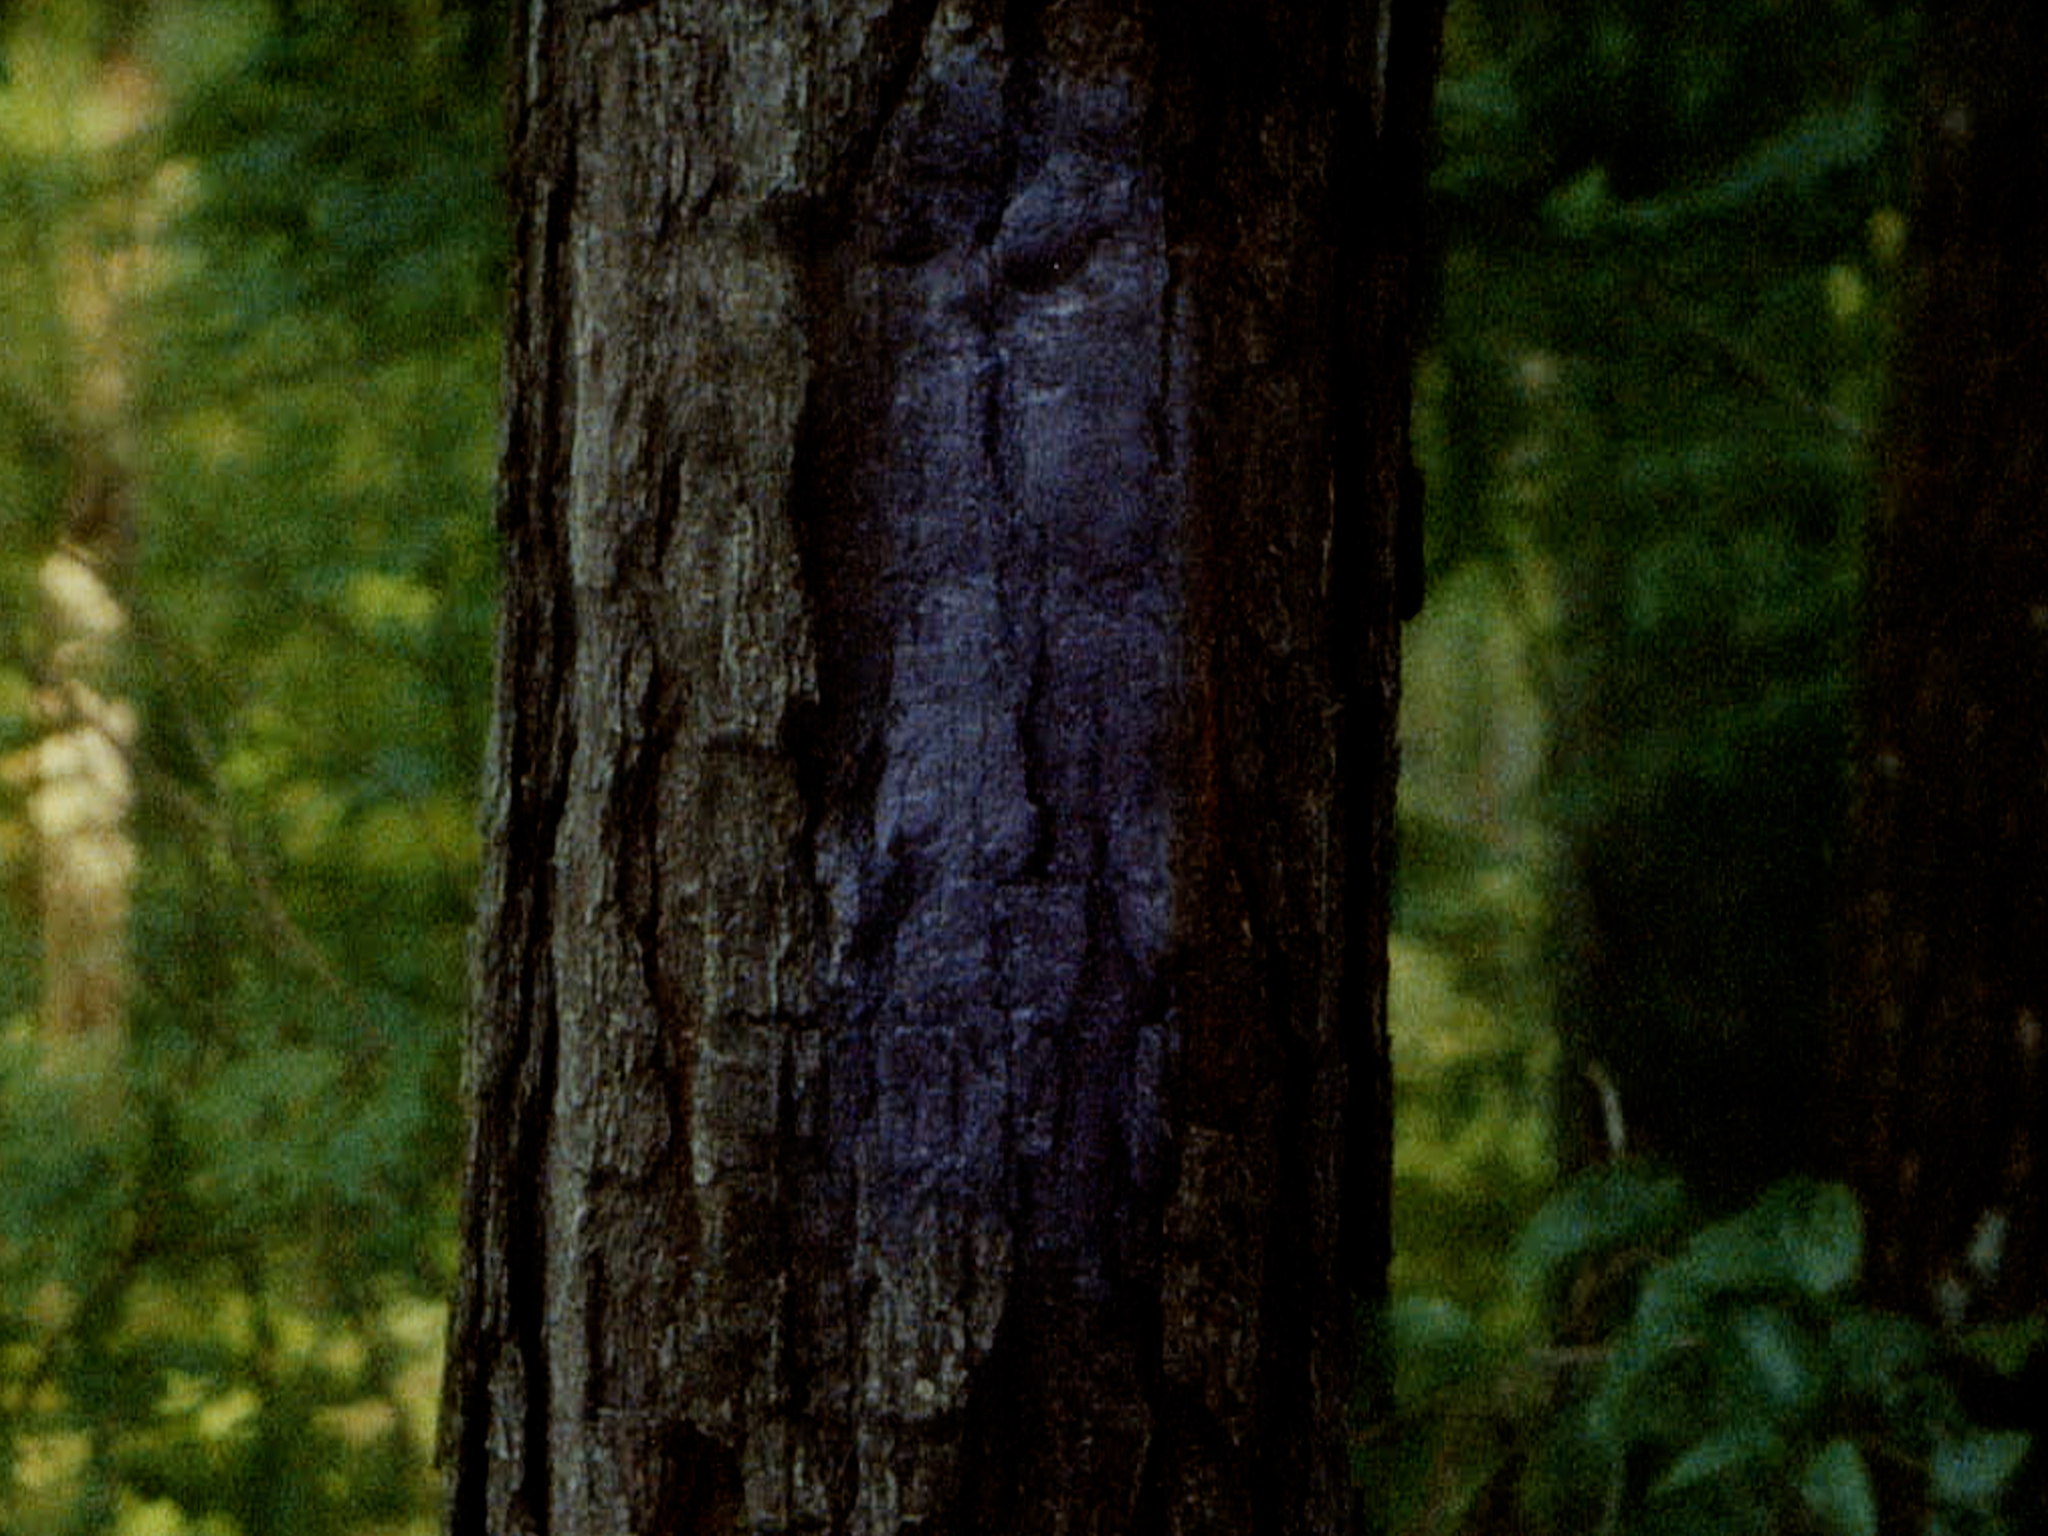 A tree trunk marked with a dark substance